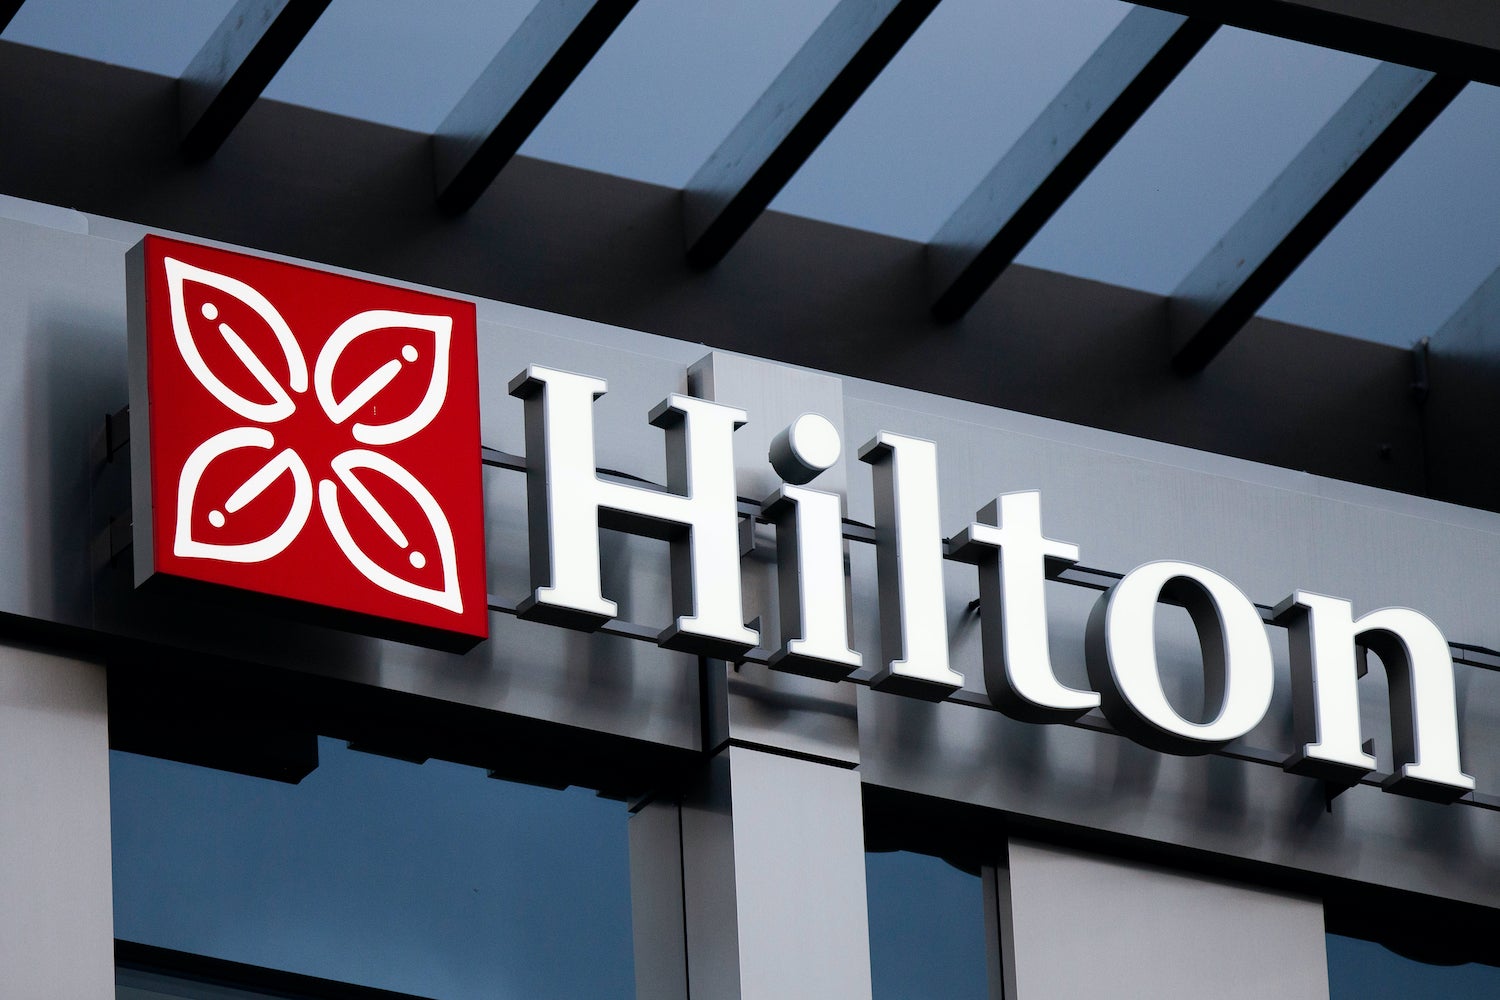 Your ultimate guide to Hilton hotel brands